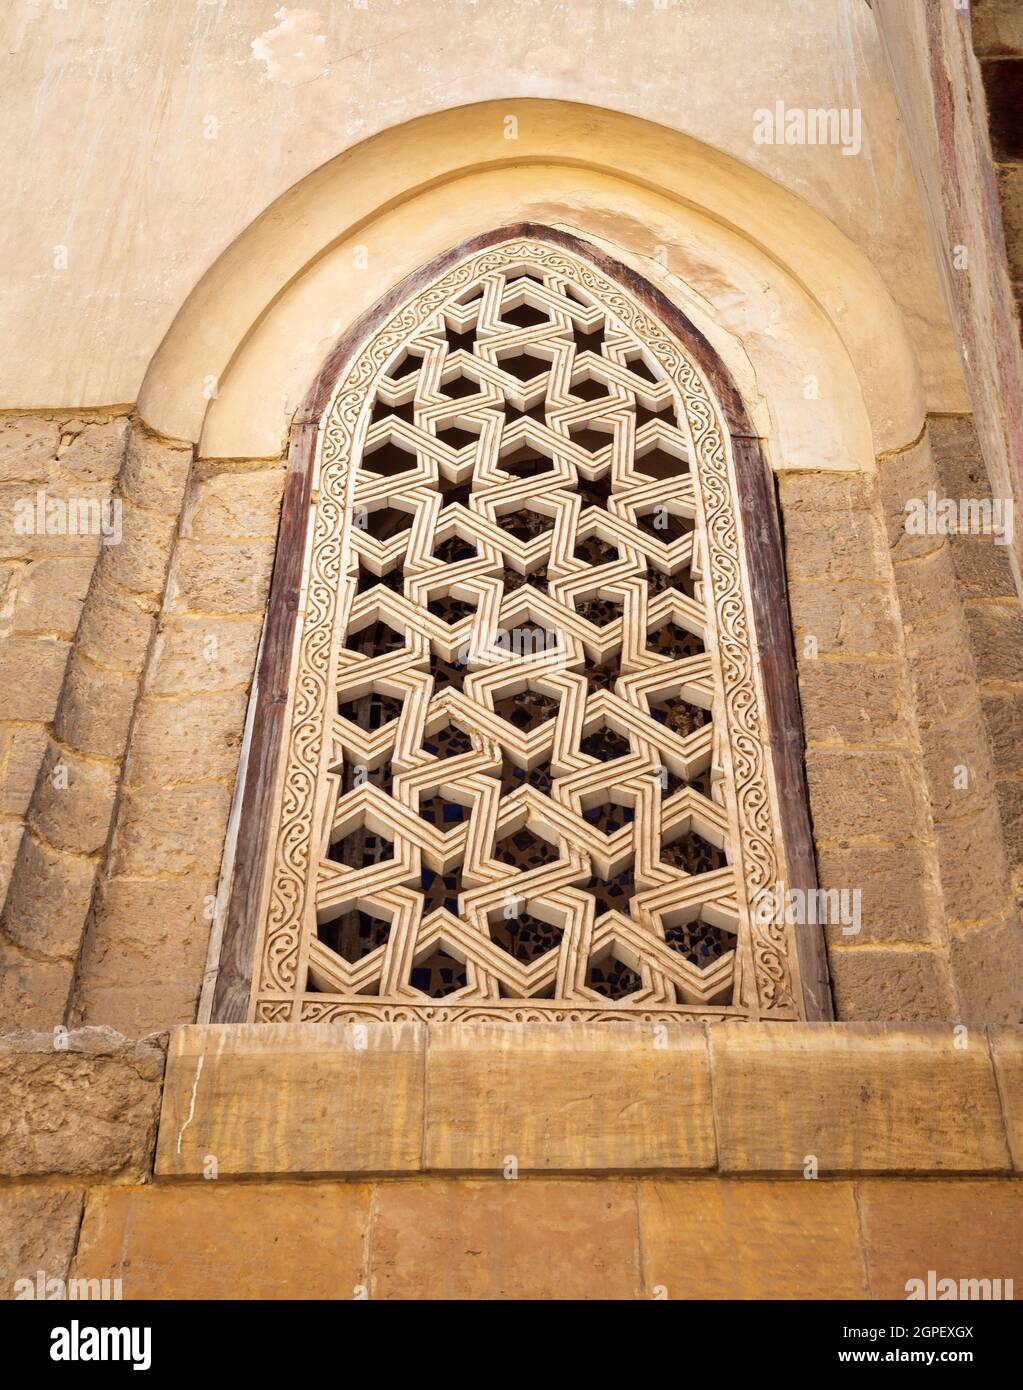 Perforated stucco window decorated with geometrical patterns, located at Mamluk era public historical Qalawun complex, Moez Street, Cairo, Egypt Stock Photo